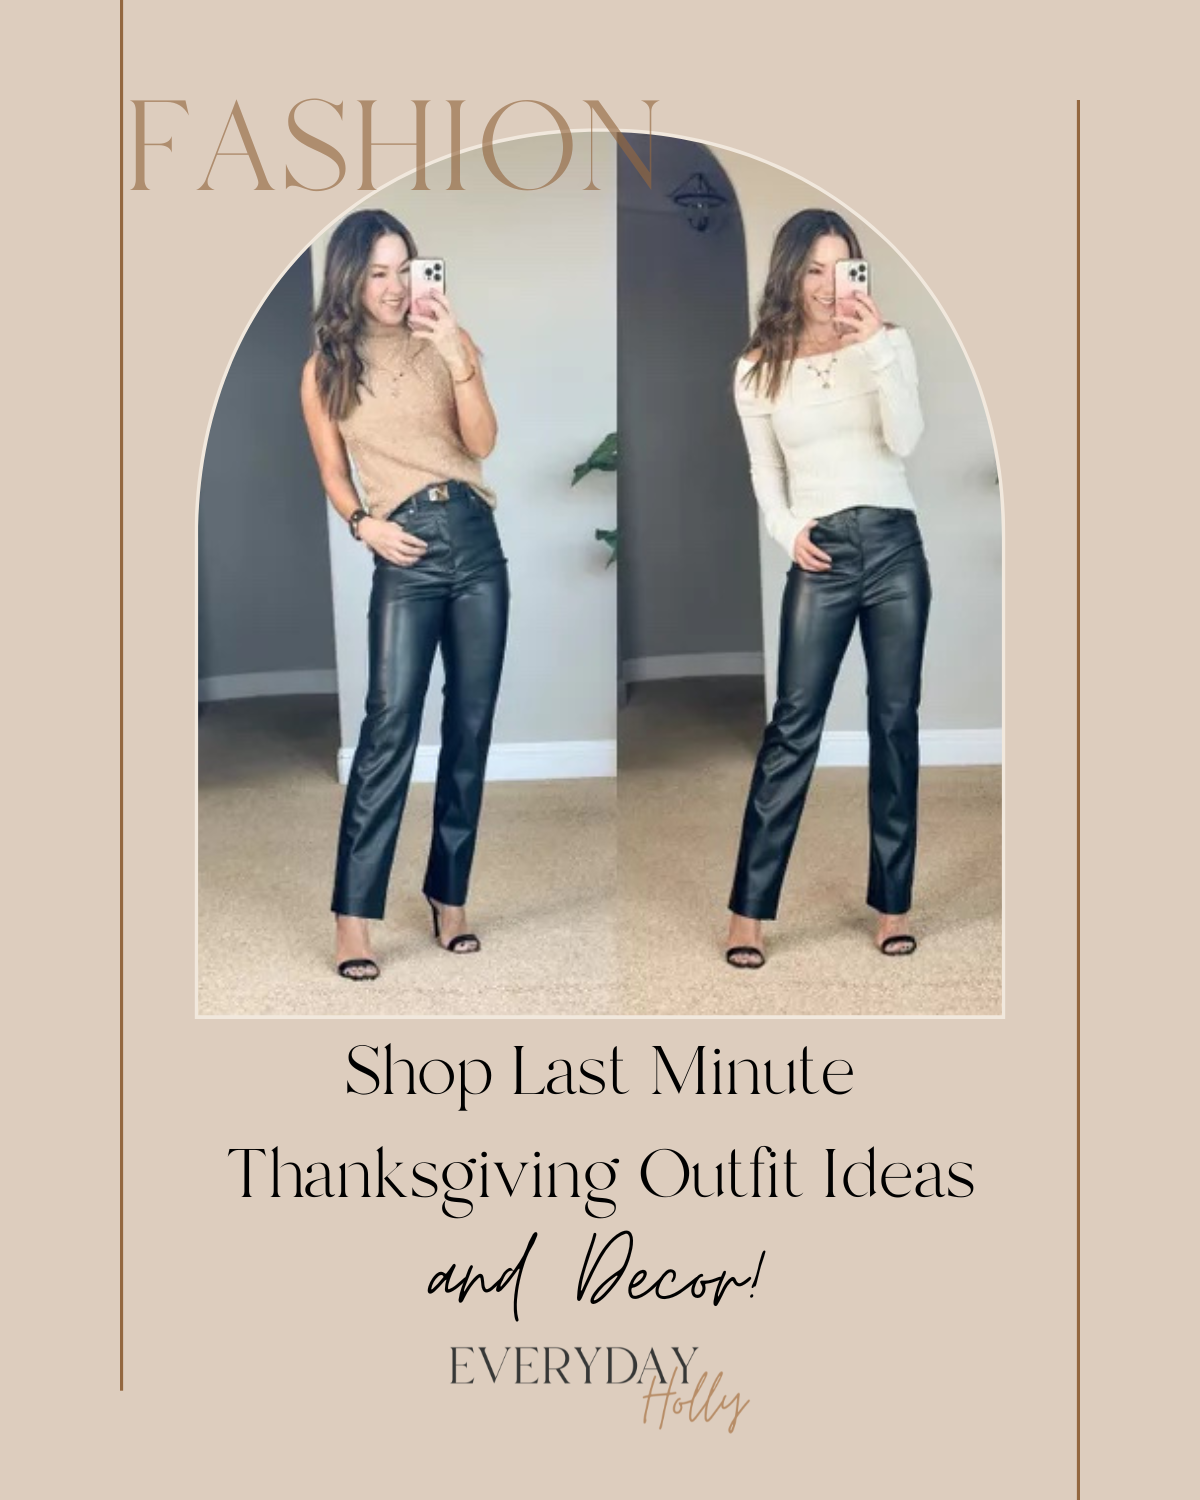 shop last minute thanksgiving outfit ideas and decor | #shop #thanksgiving #thanksgivingoutfit #holiday #falloutfit #fallfashion #decor #homedecor